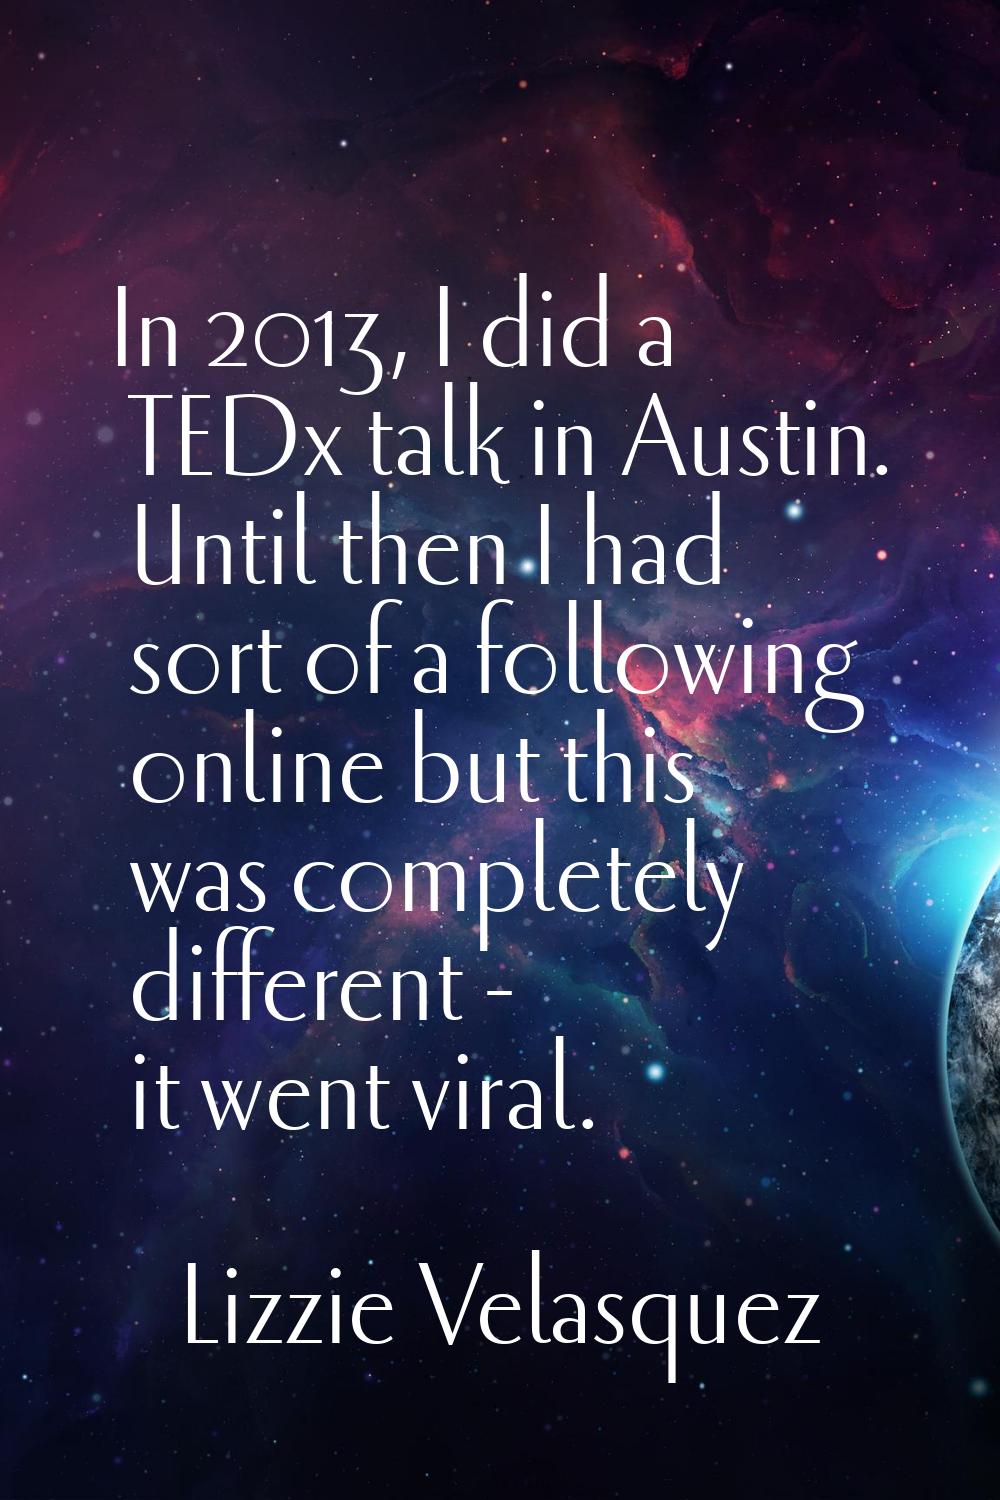 In 2013, I did a TEDx talk in Austin. Until then I had sort of a following online but this was comp